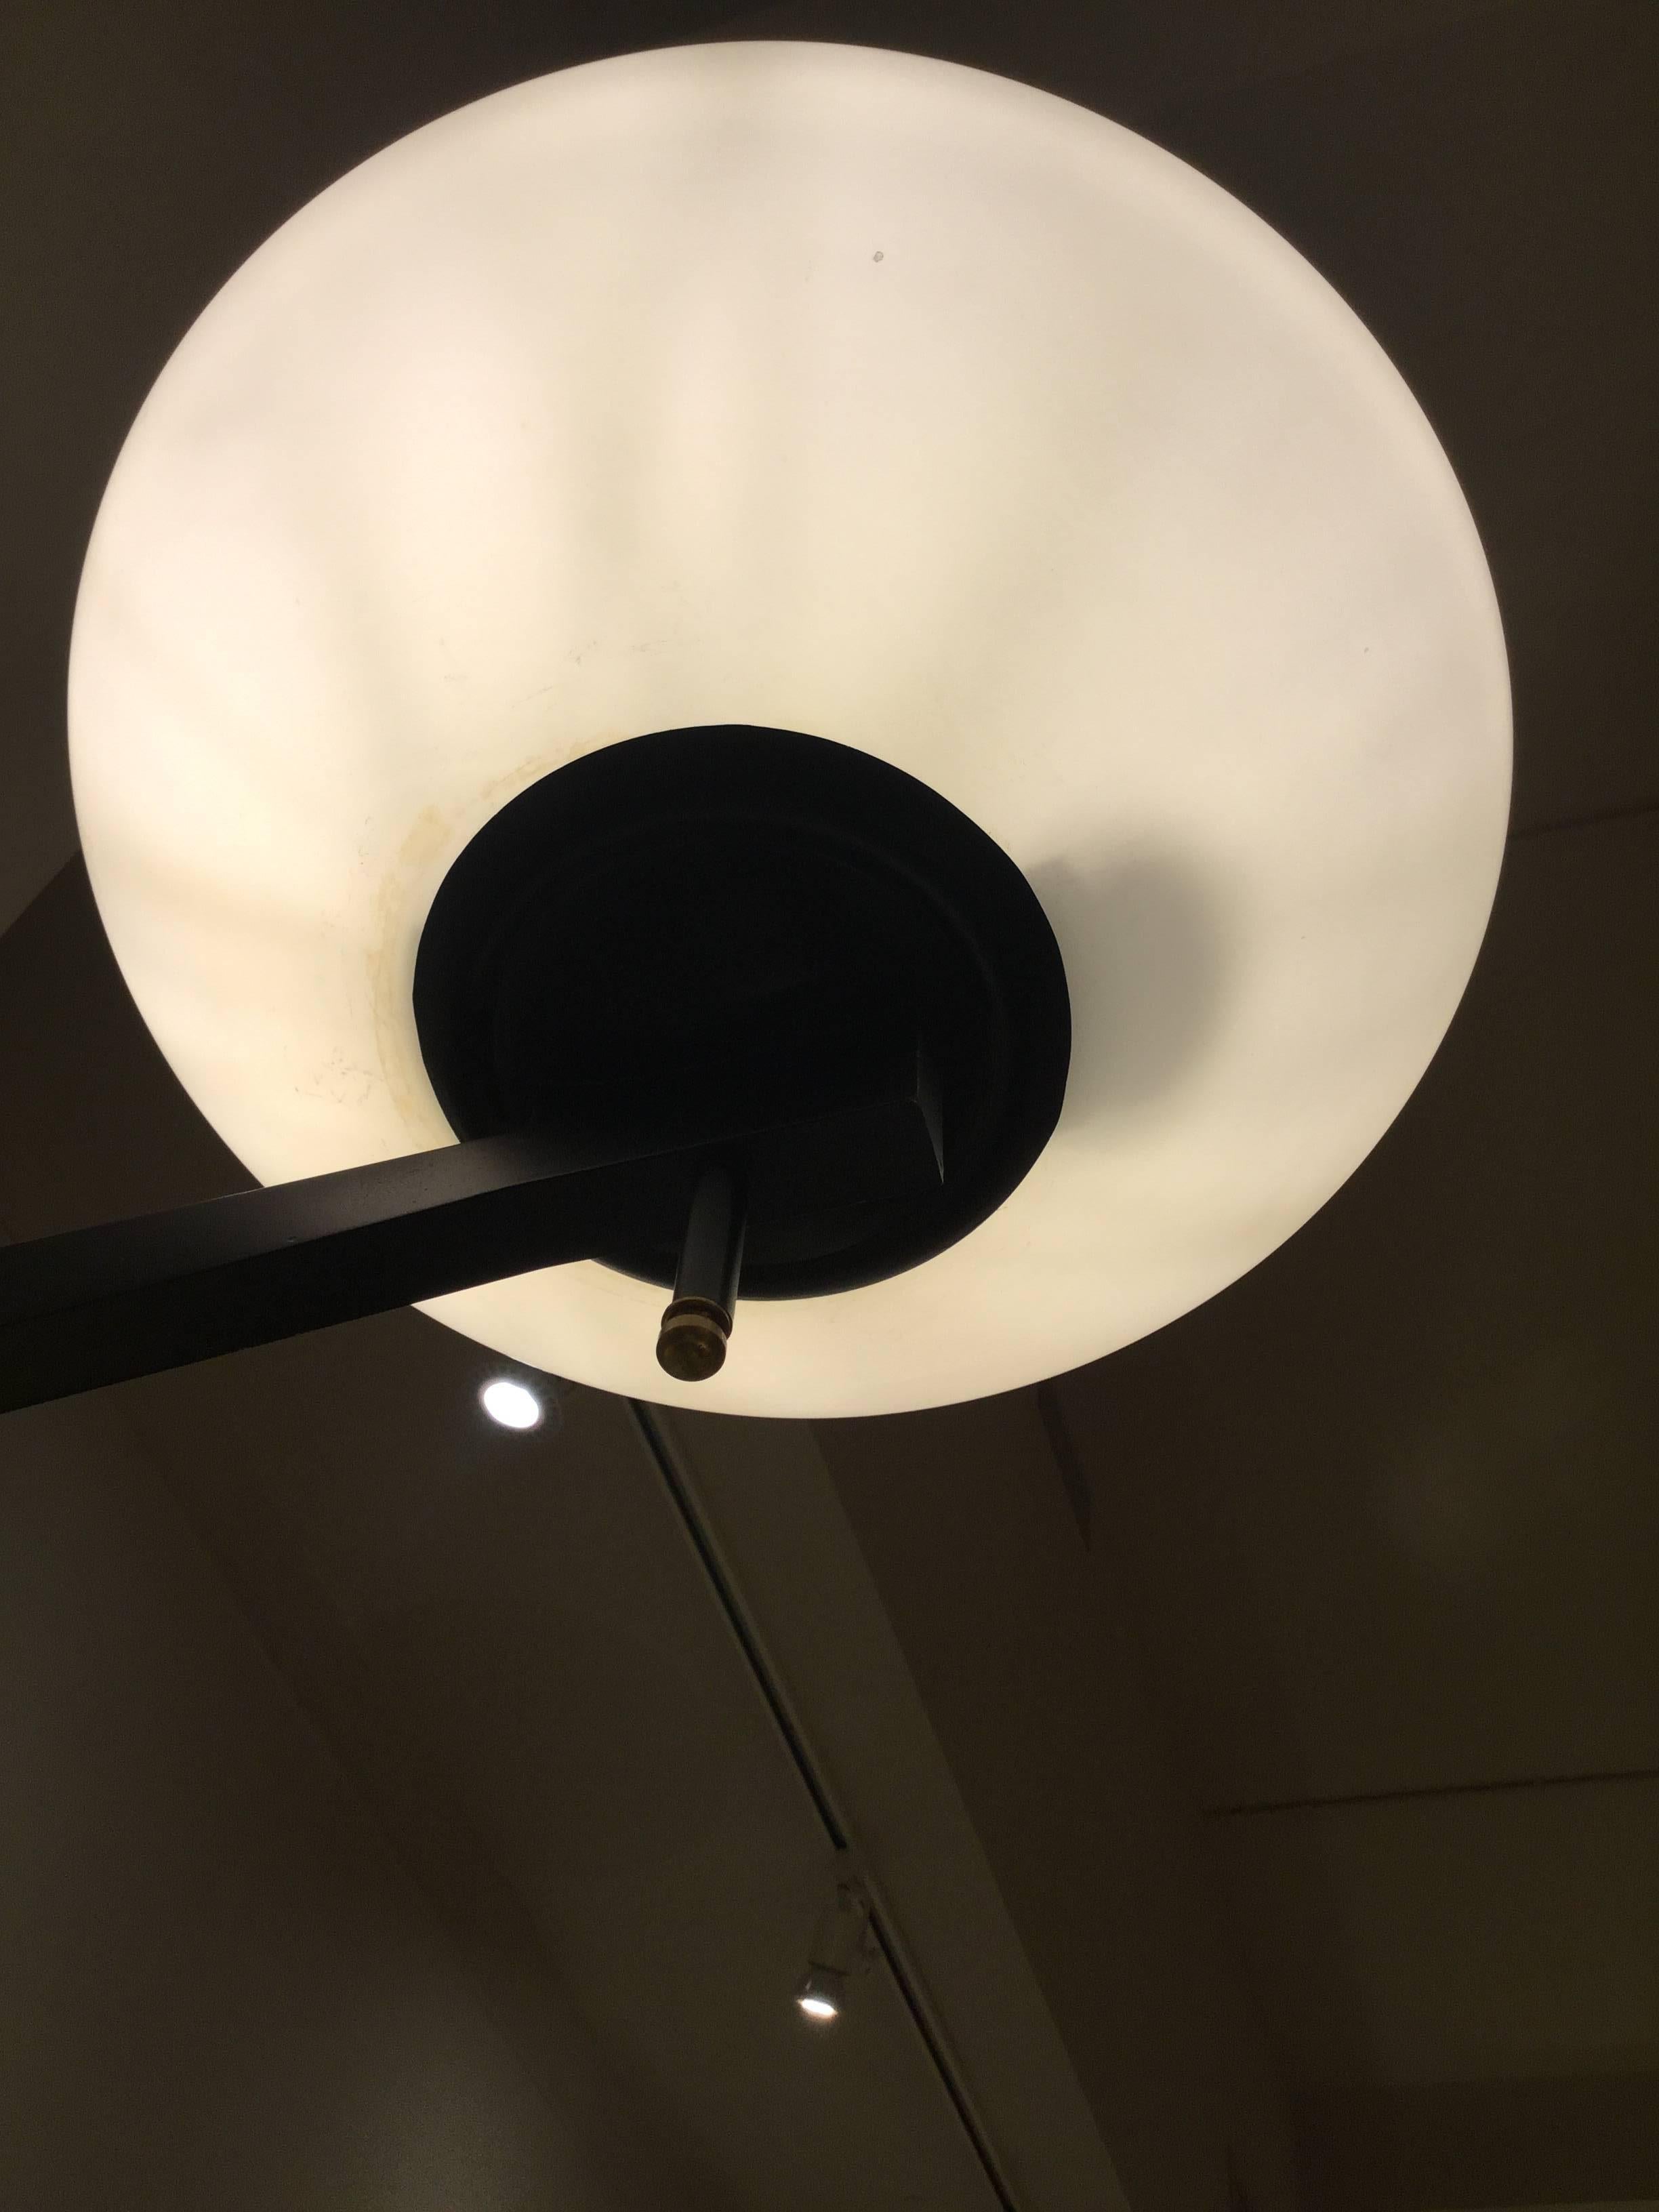 Each wall light composed of a black enameled metal bracket holding a round white glass shade on a horizontally extended arm.

OUR REFERENCE N10094